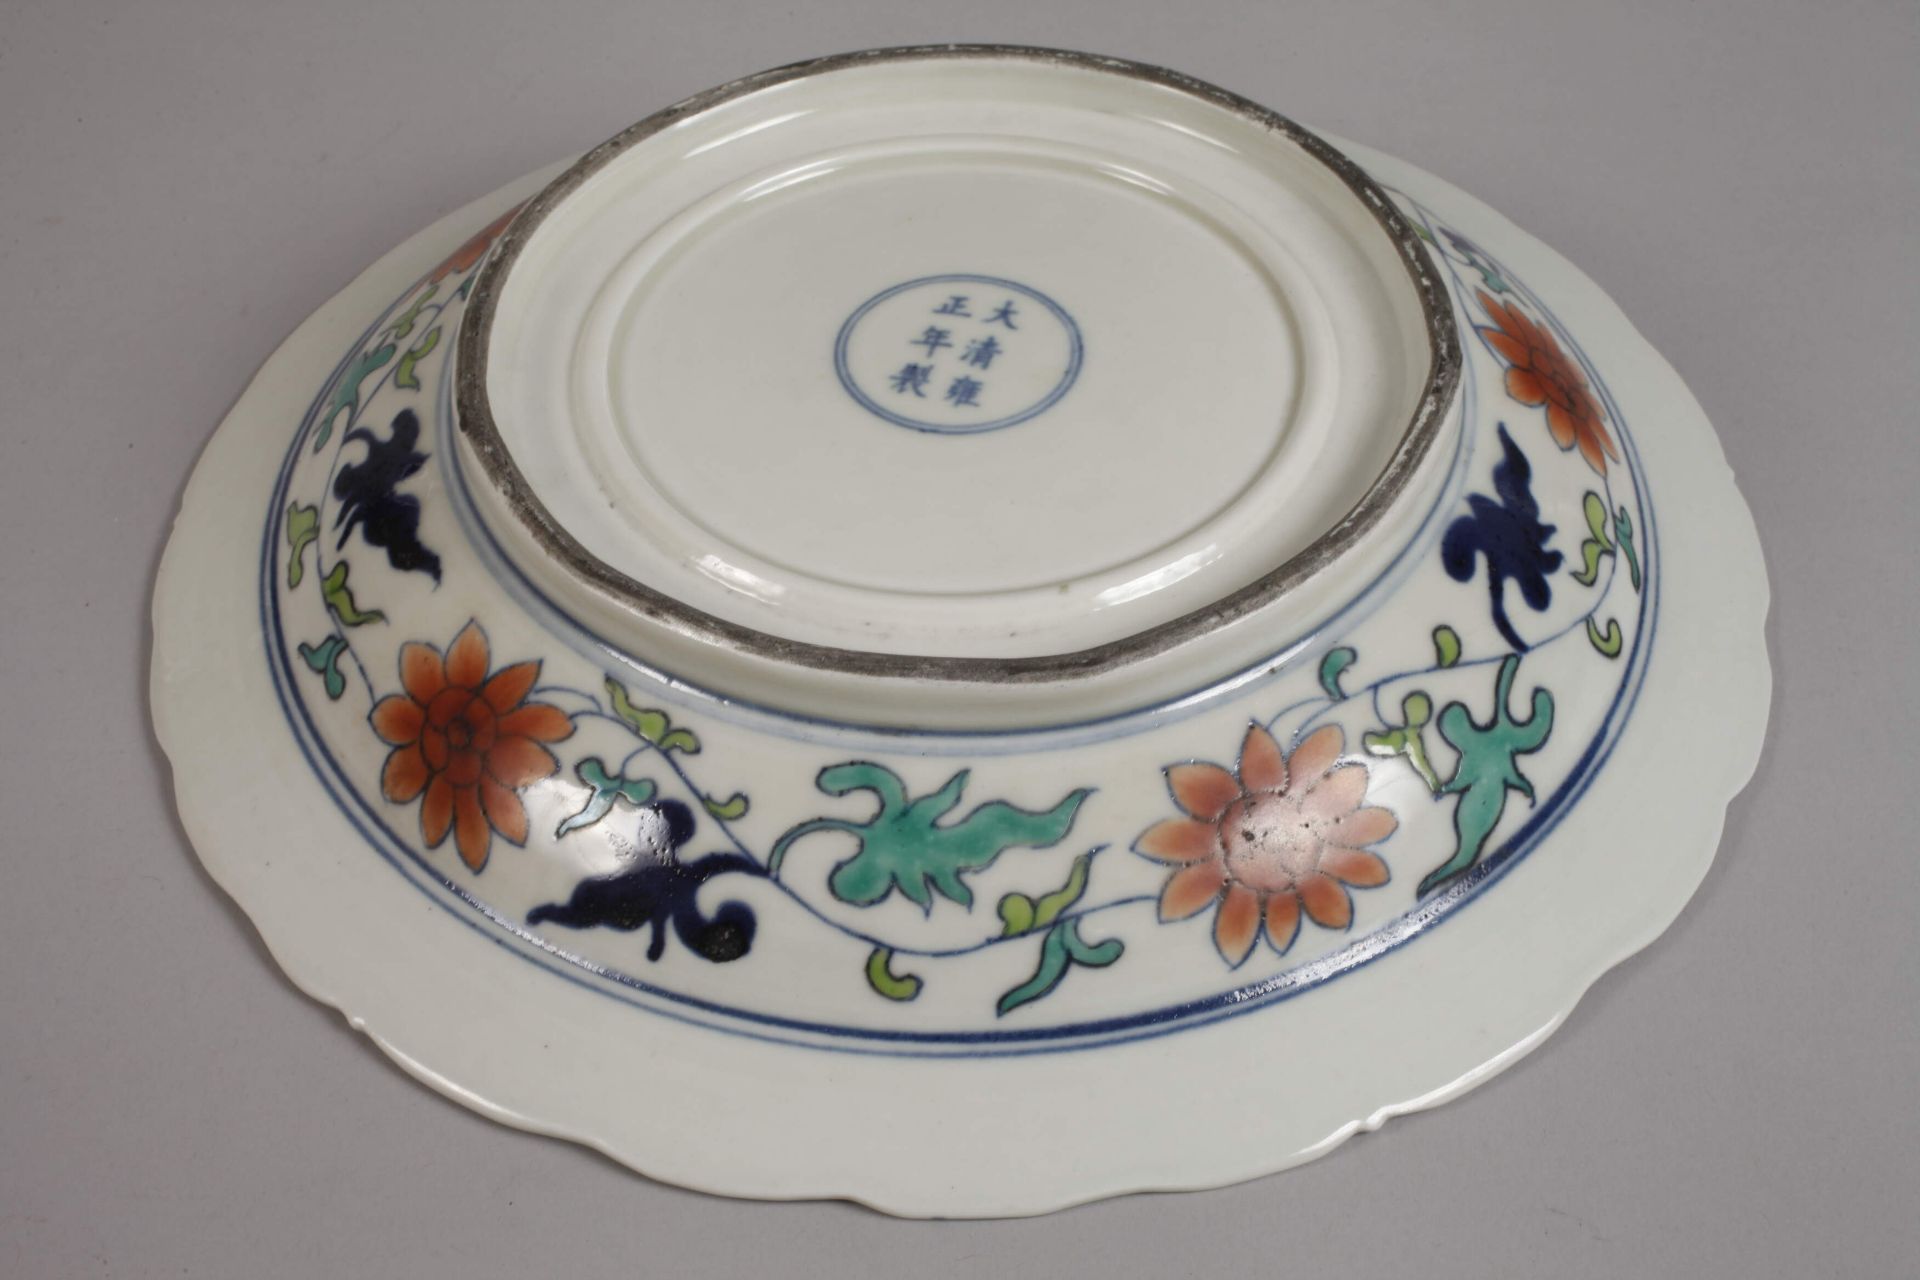 Decorative plate - Image 4 of 5